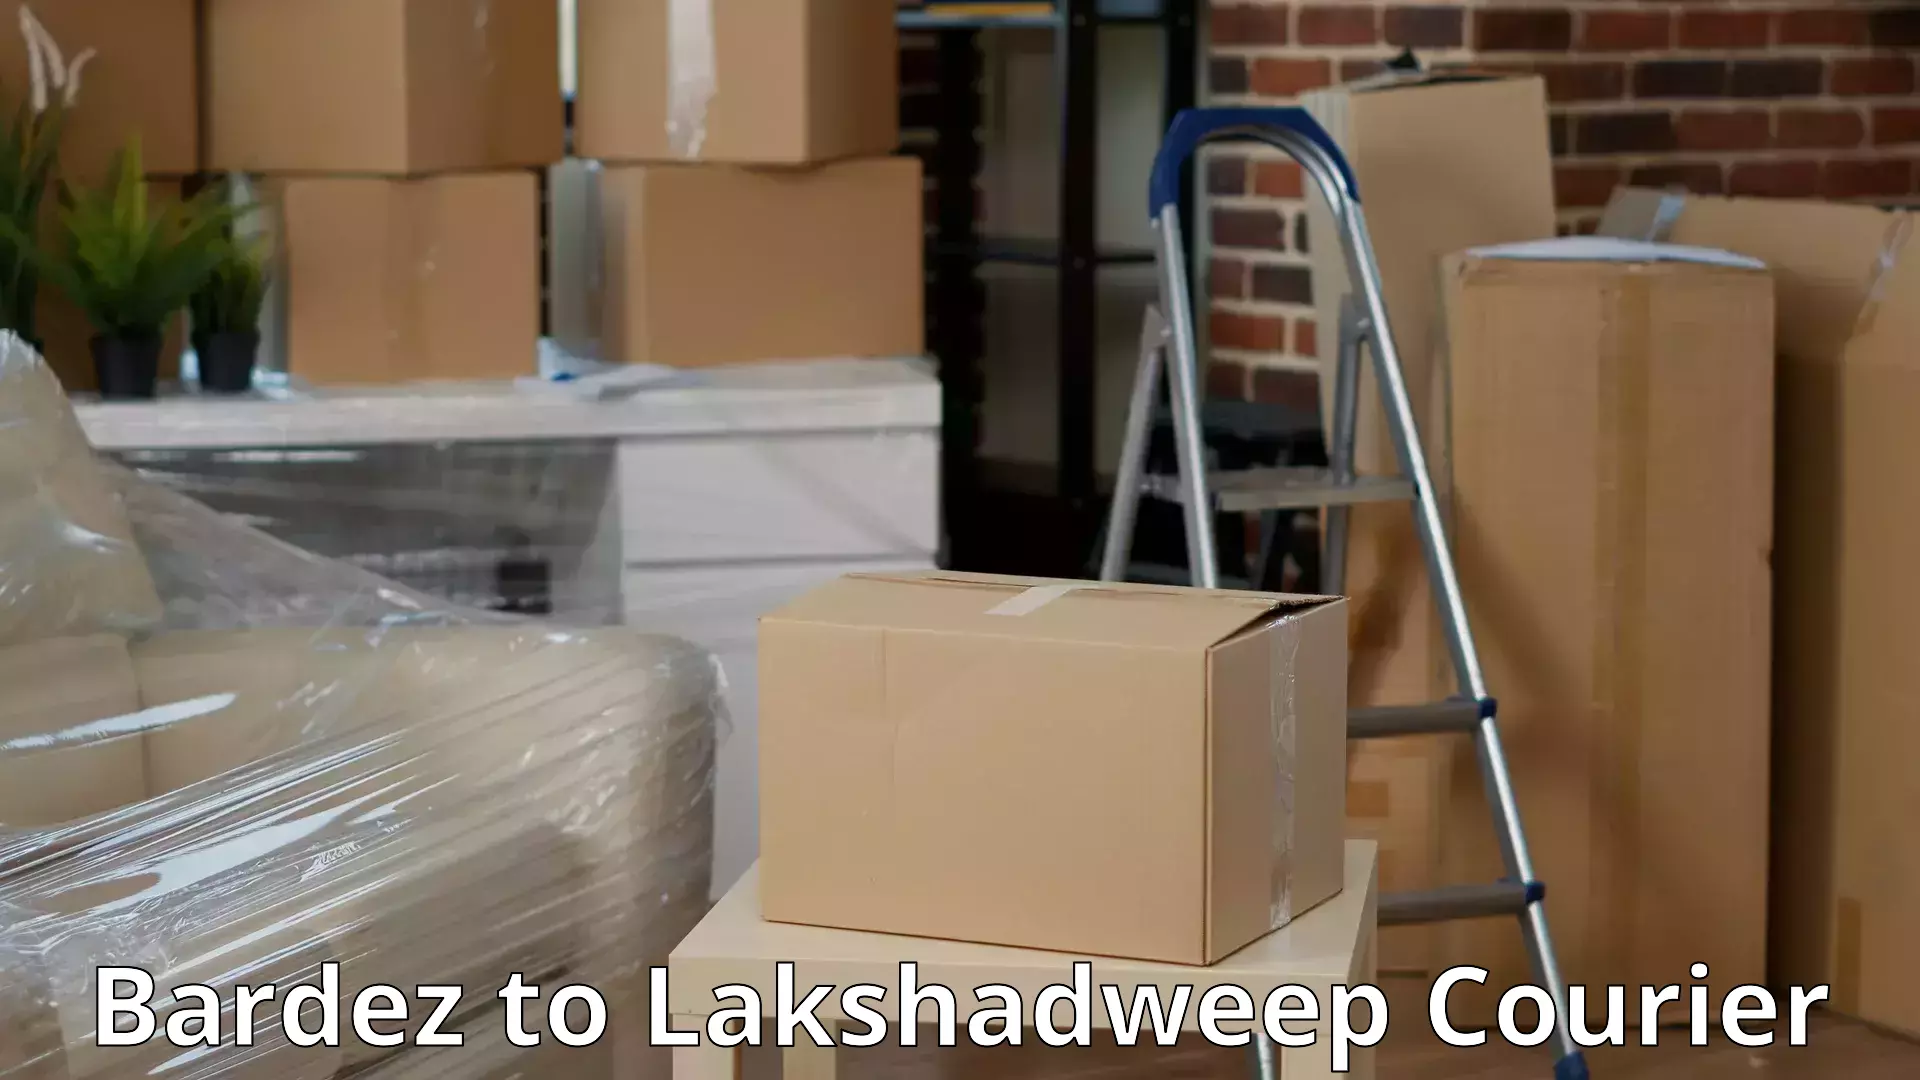 Professional movers and packers Bardez to Lakshadweep